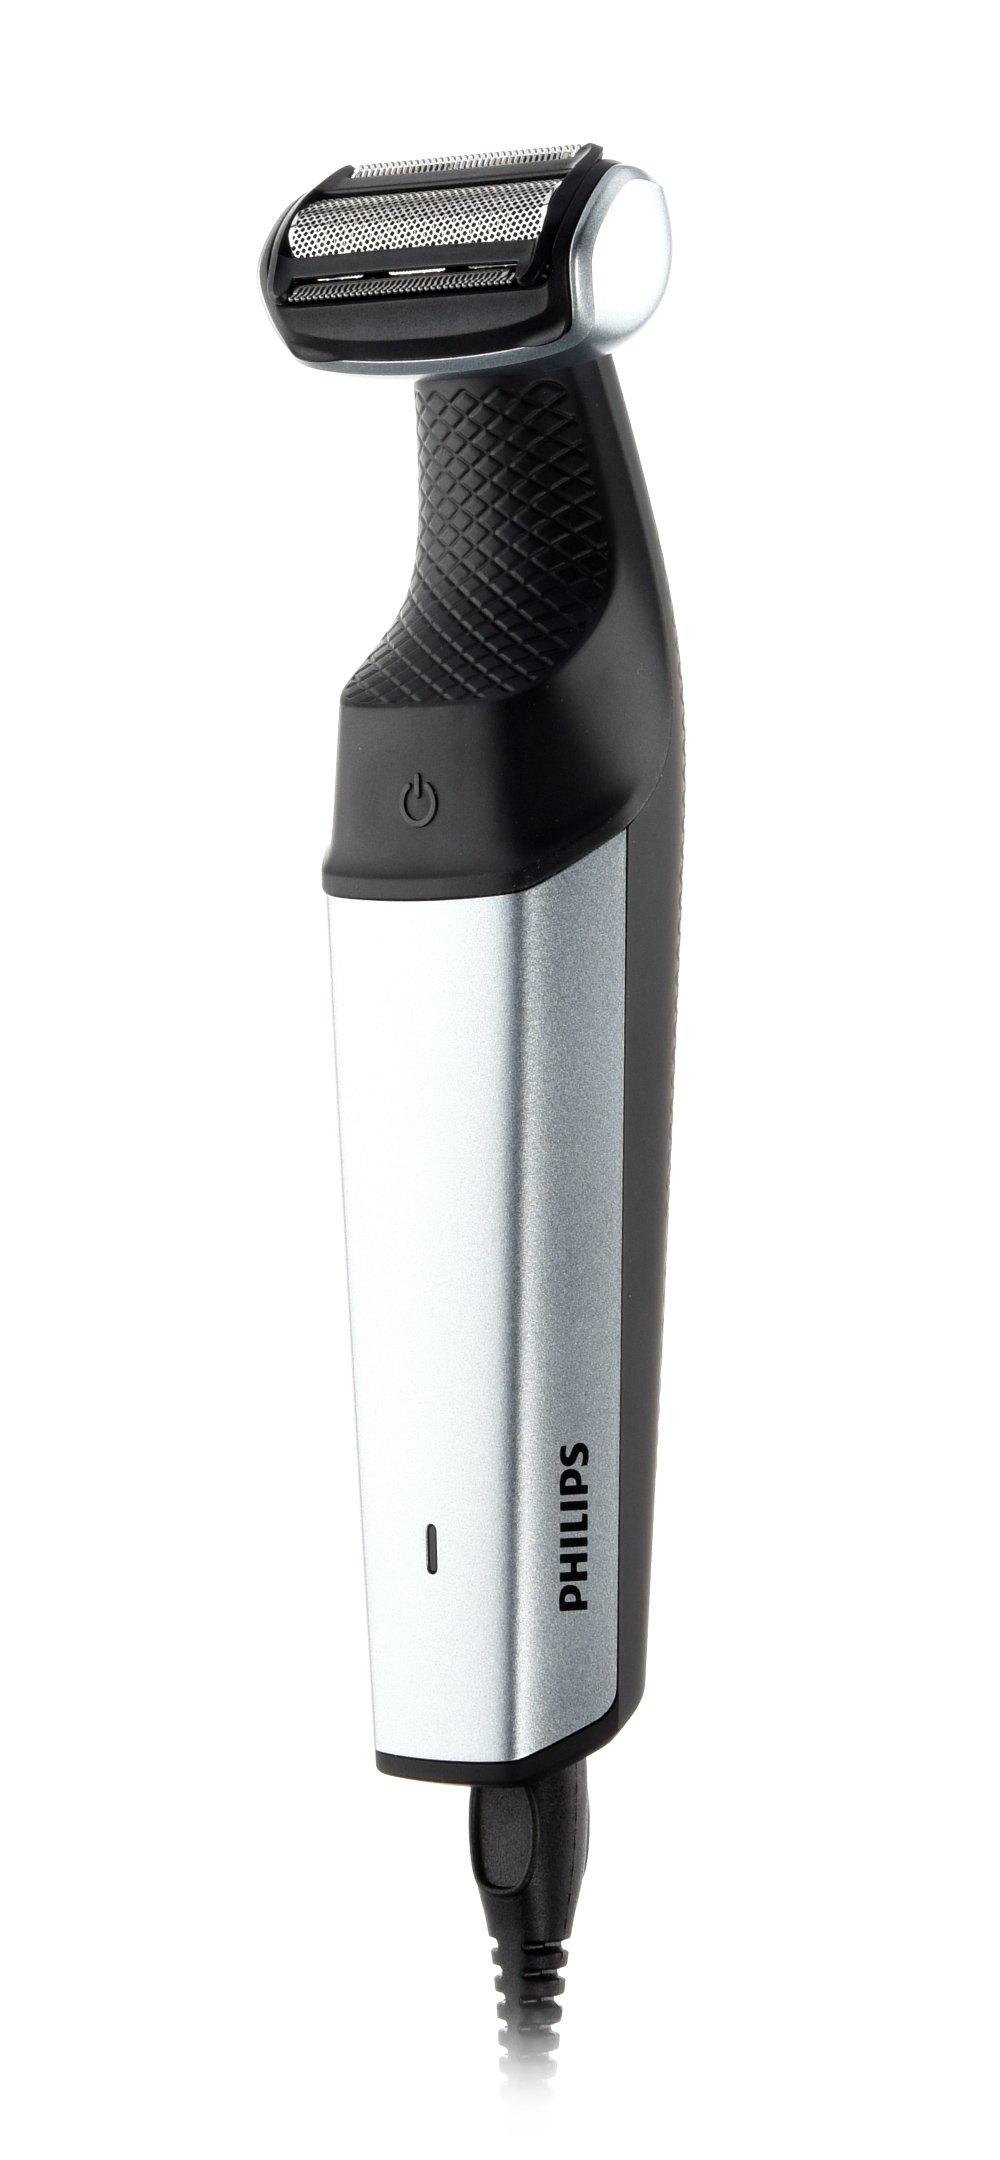 PHILIPS Bodygroom with foil shaver - eXtra Bahrain